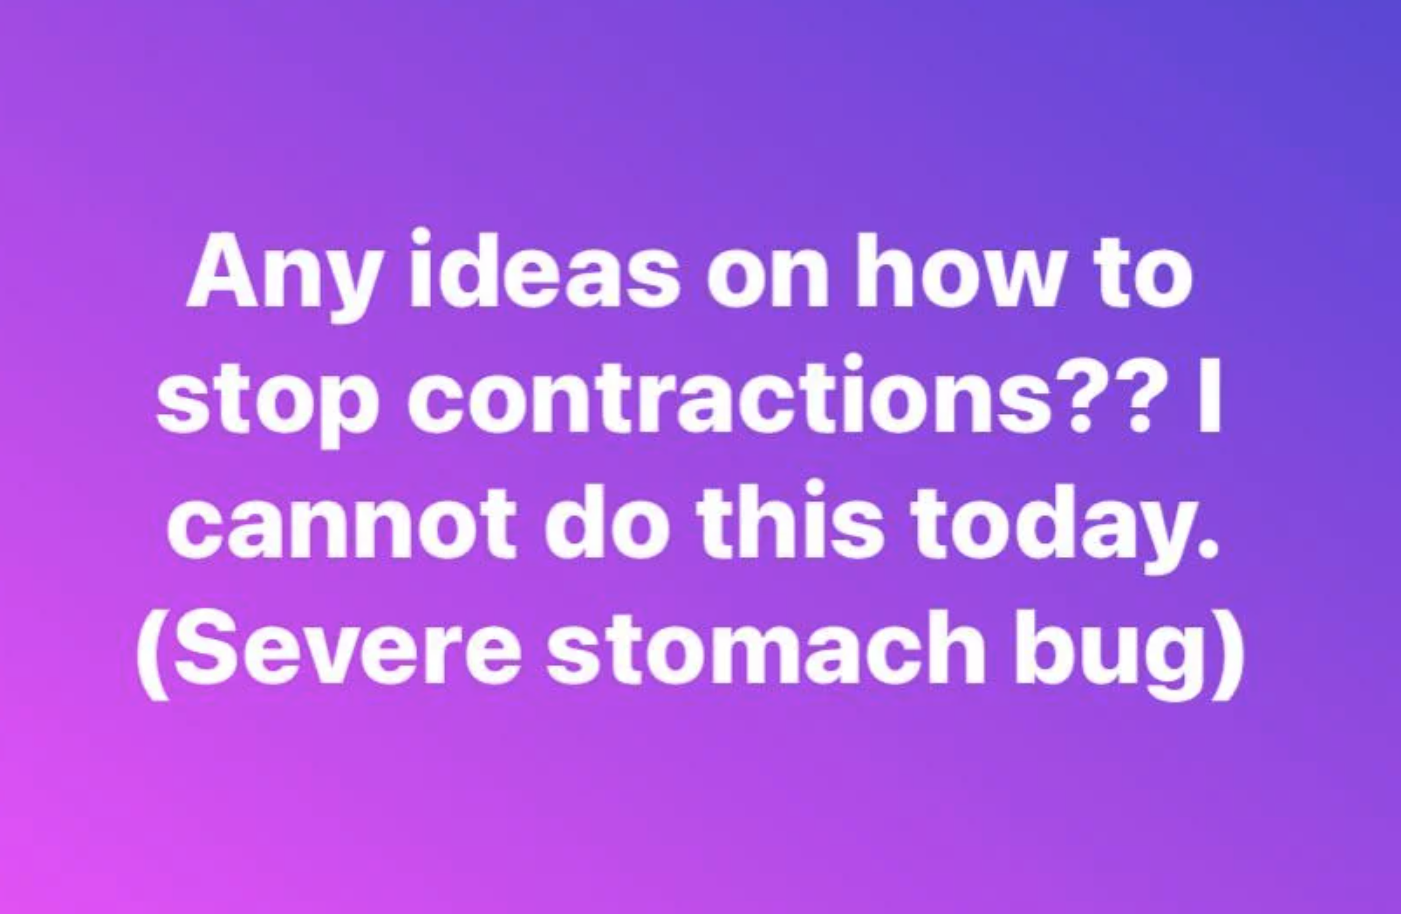 &quot;Any ideas on how to stop contractions??&quot;